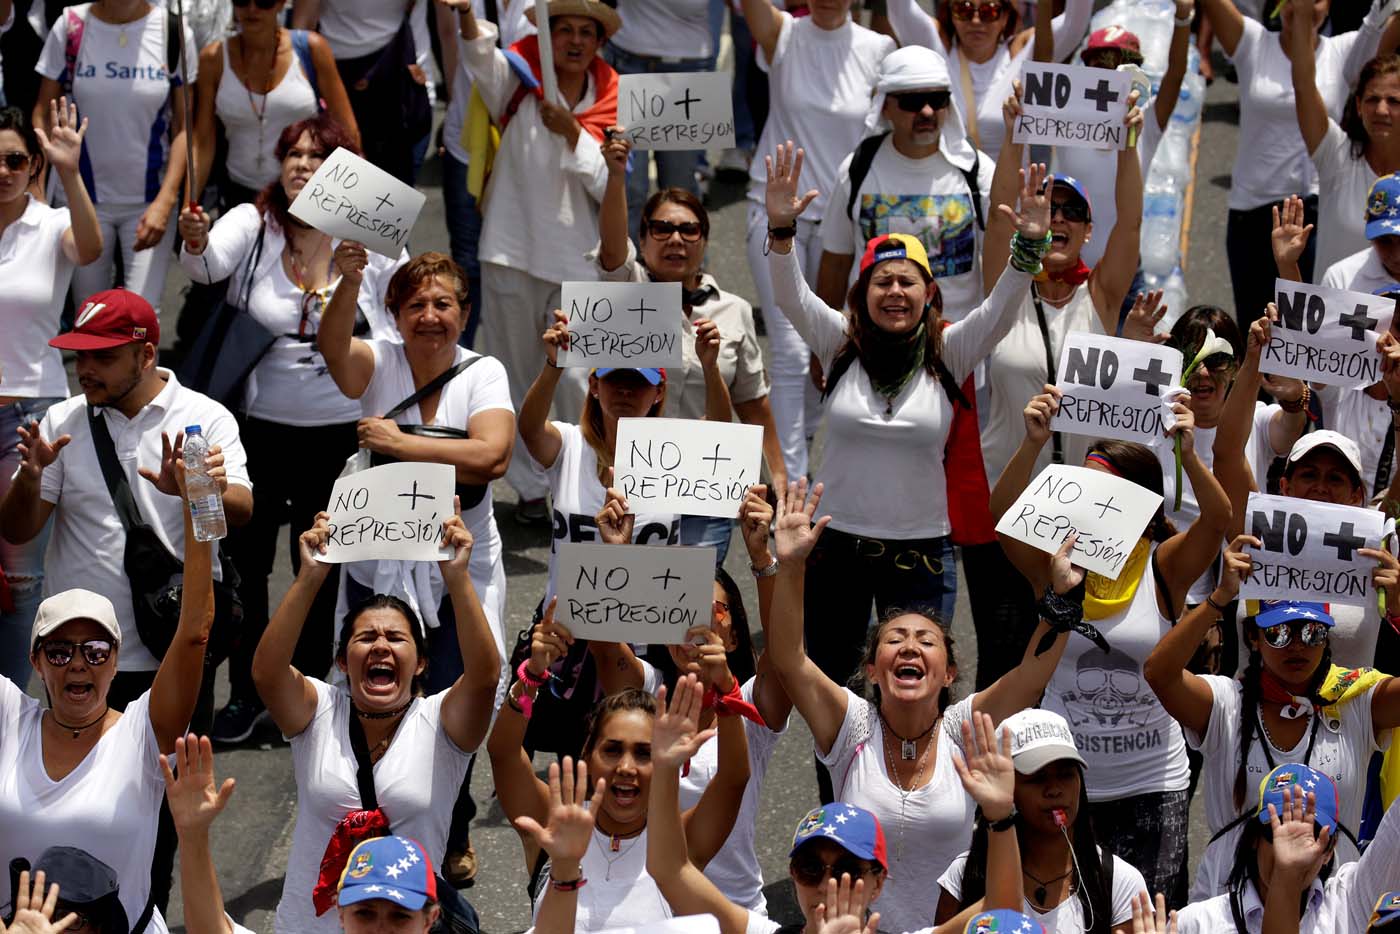 Demonstrators hold placards that read "No more repression" during a women's march to protest against President Nicolas Maduro's government in Caracas, Venezuela, May 6, 2017. REUTERS/Marco Bello